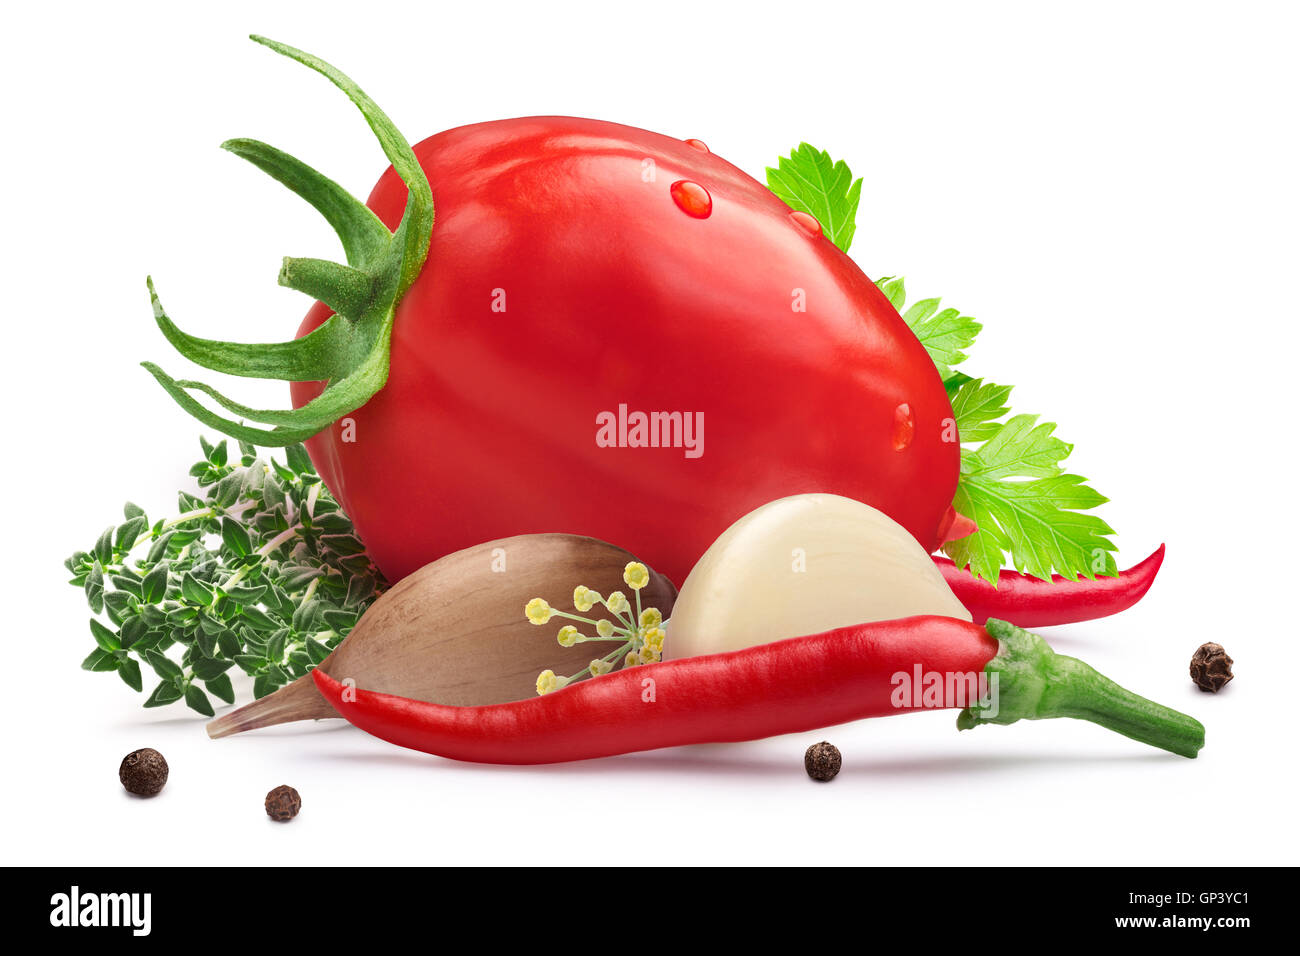 Fresh tomato for pickling with herbs, chili peppers and garlic. Clipping path, shadow separated. Design elements Stock Photo